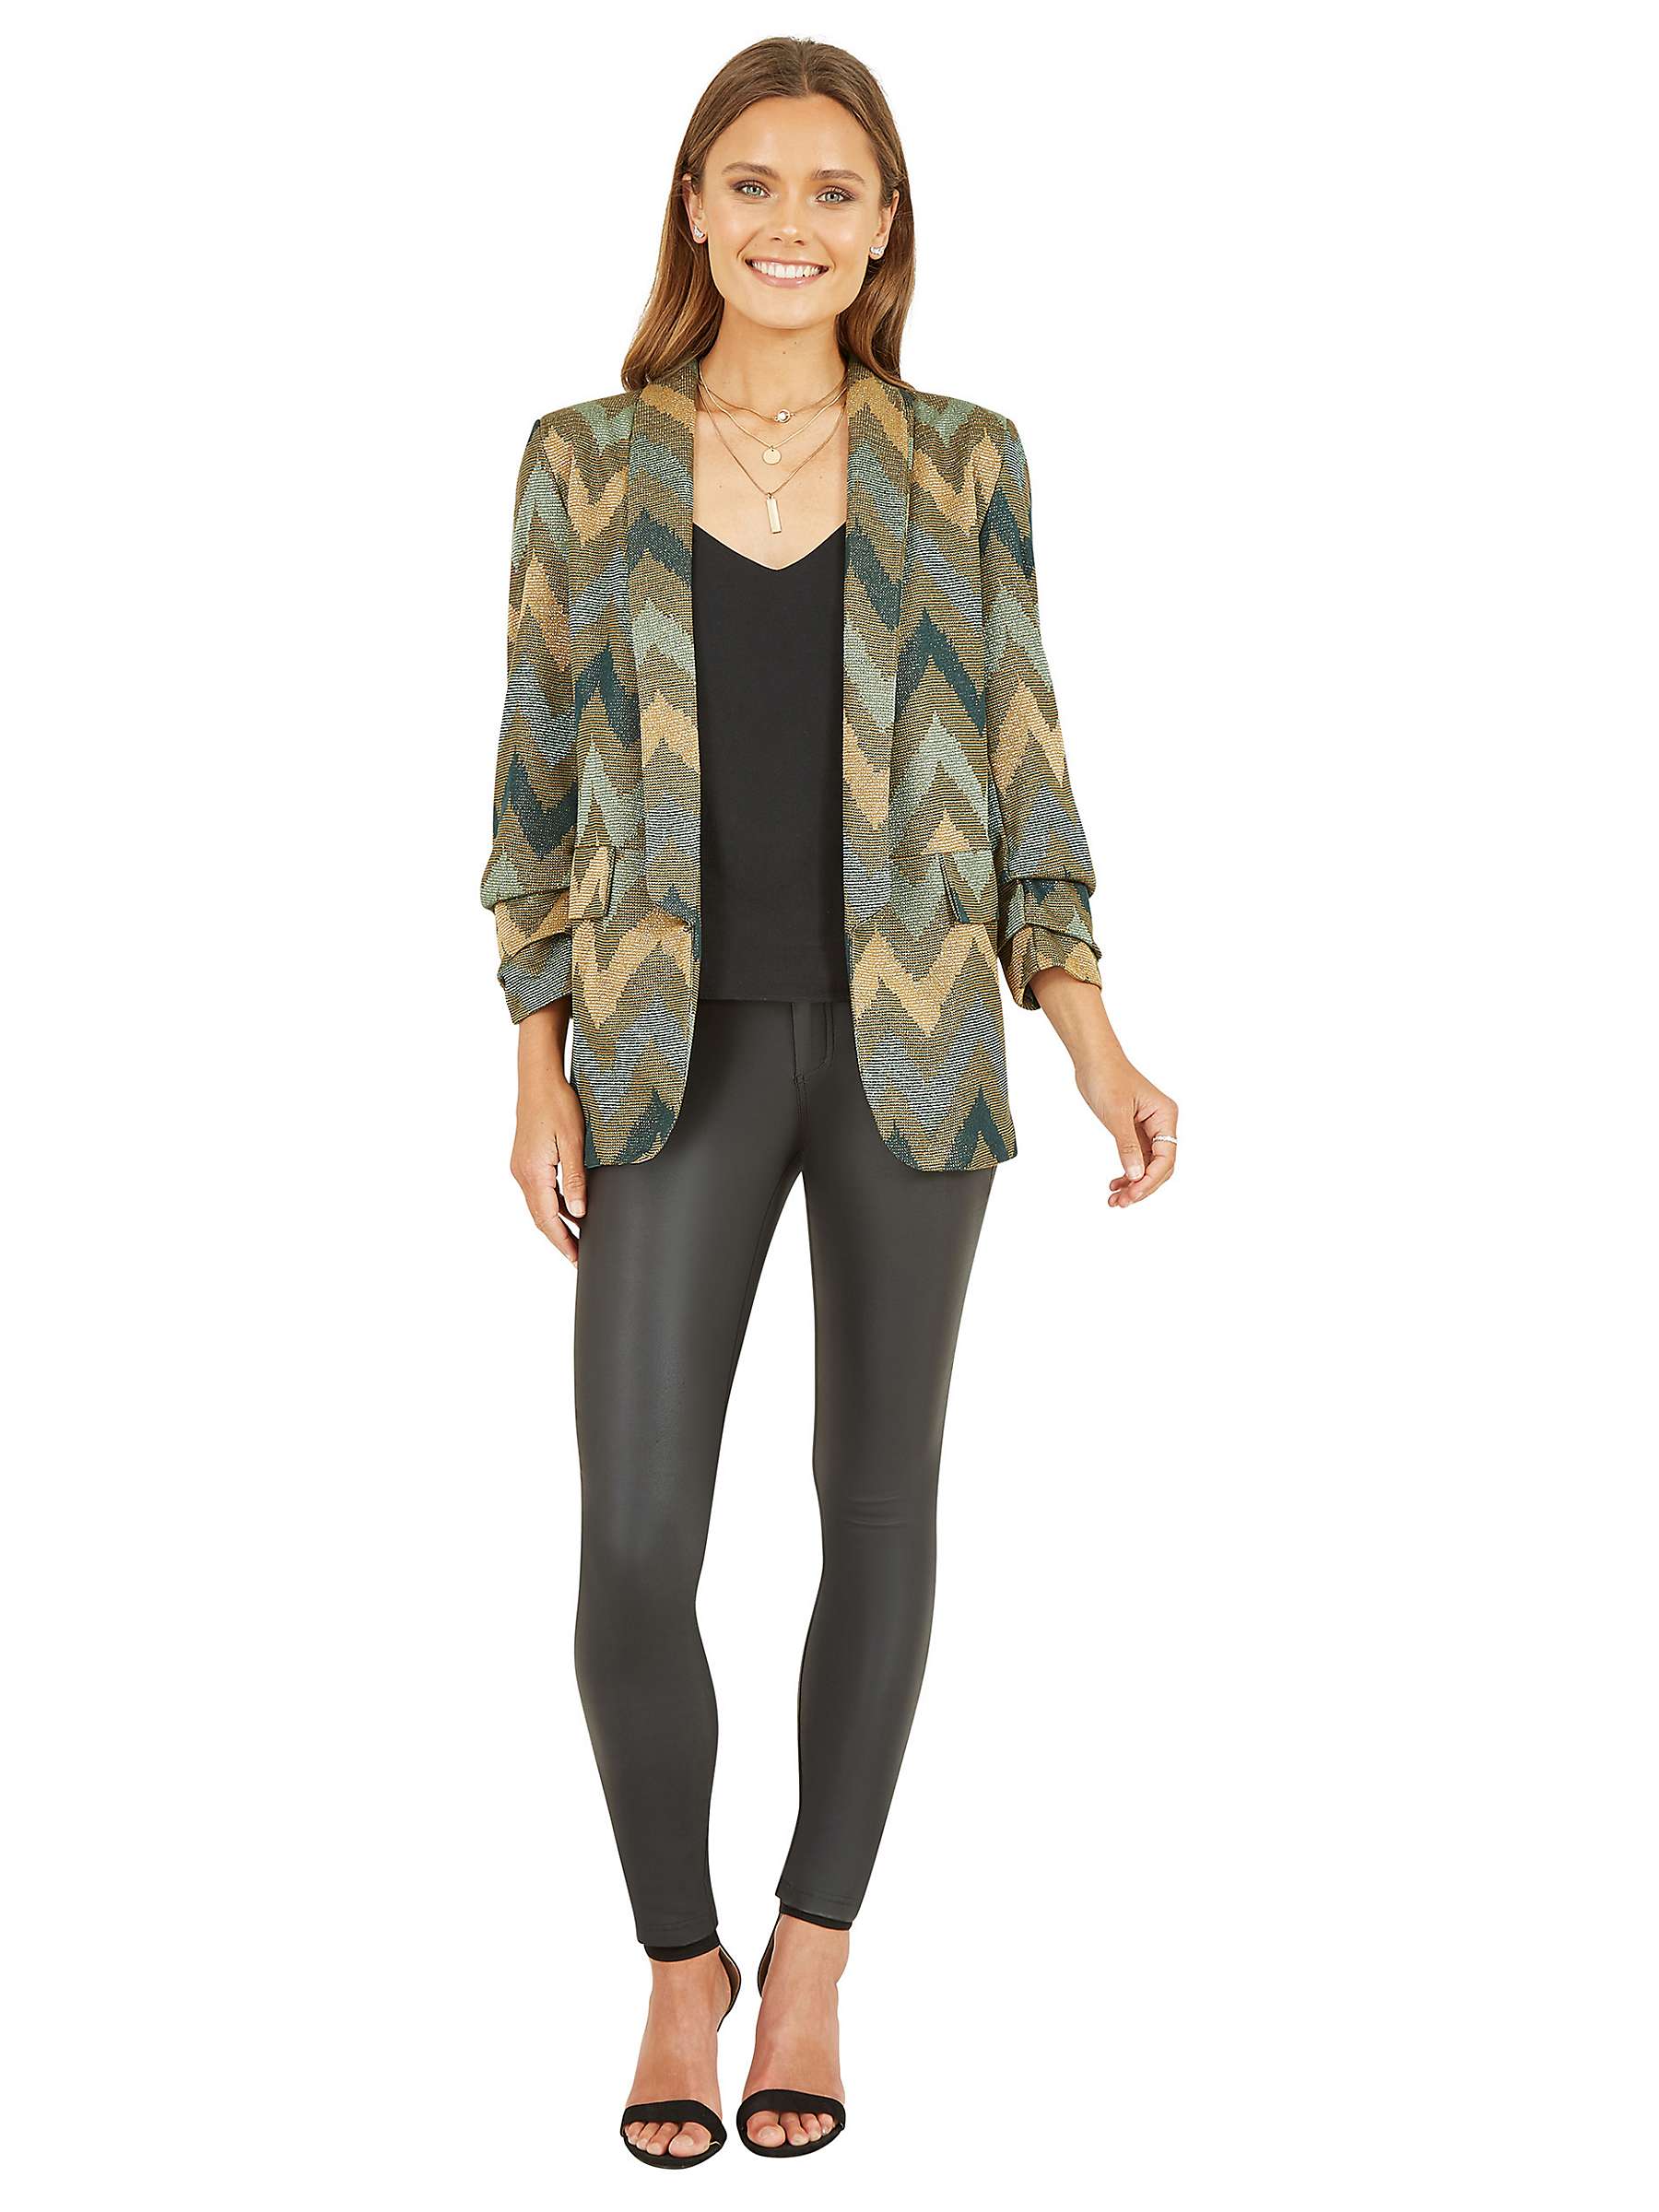 Buy Yumi Chevron Relaxed Fit Blazer, Green/Multi Online at johnlewis.com